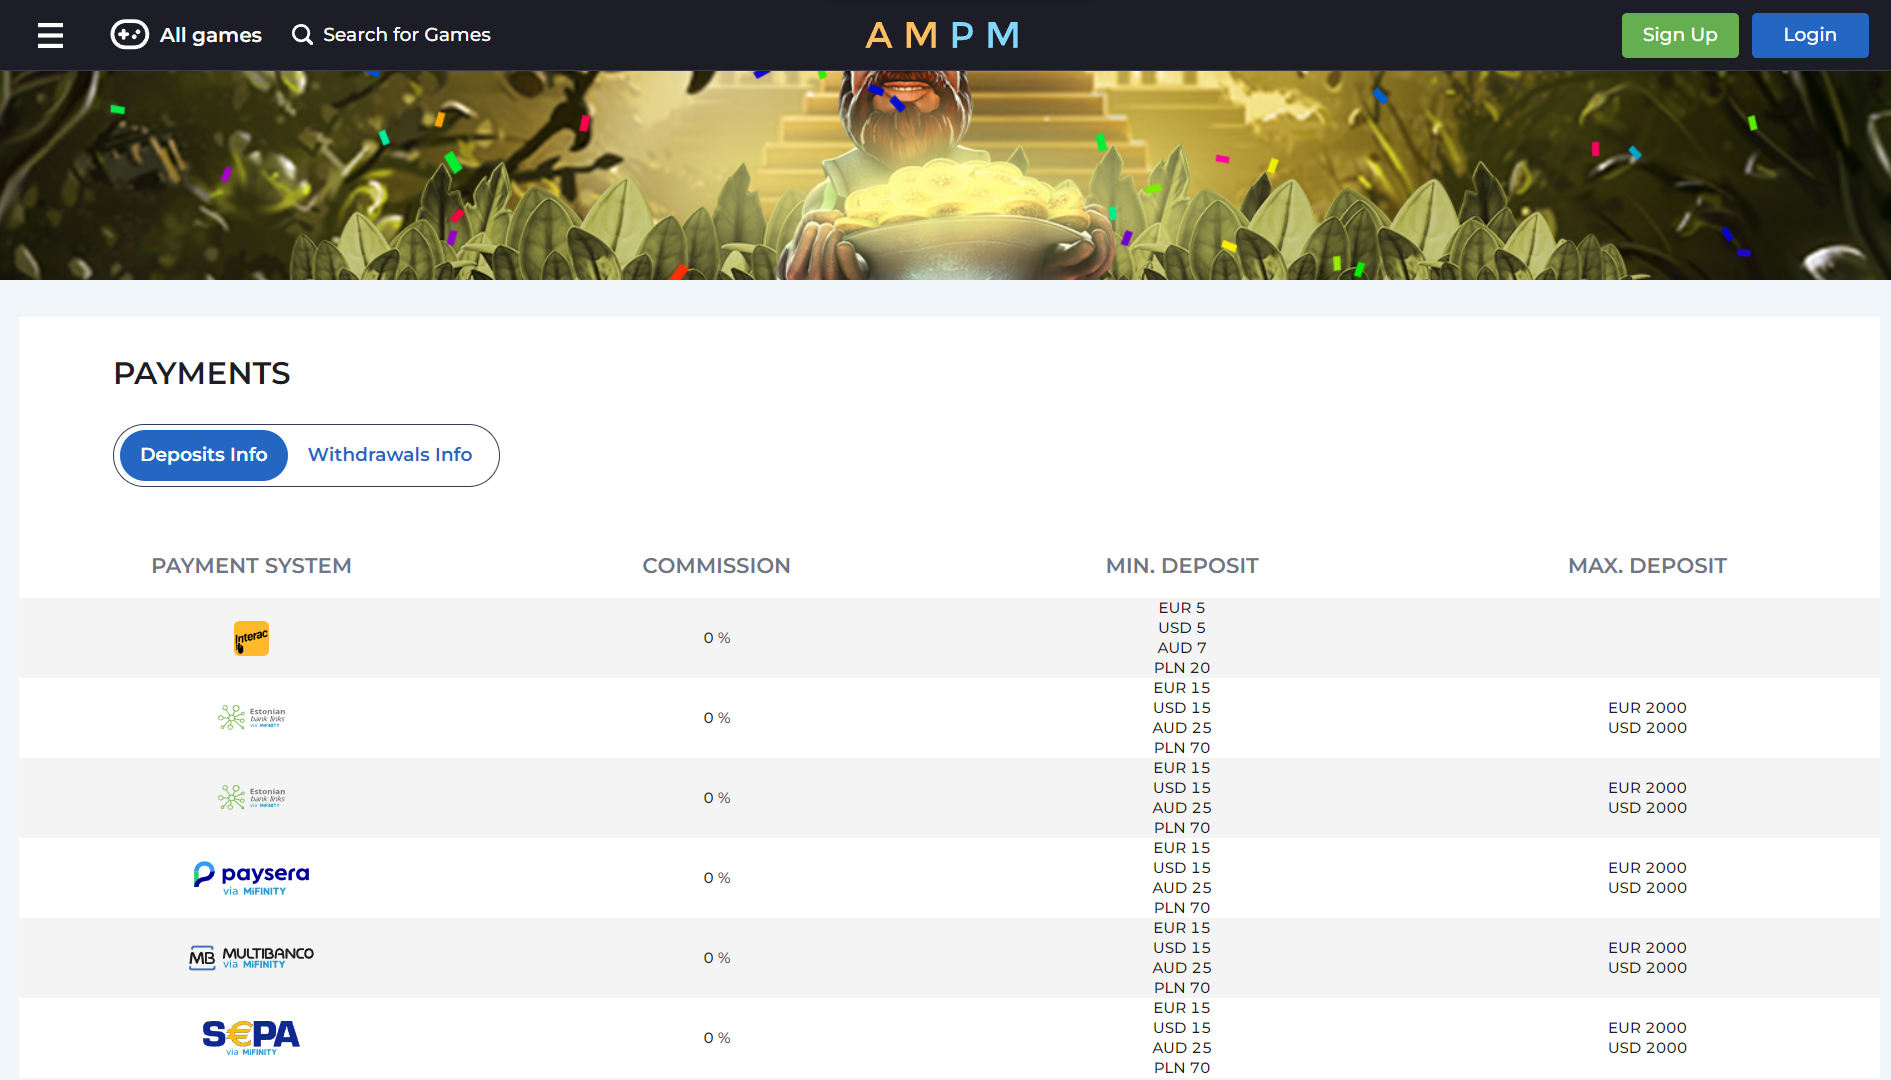 AMPM Casino Payments